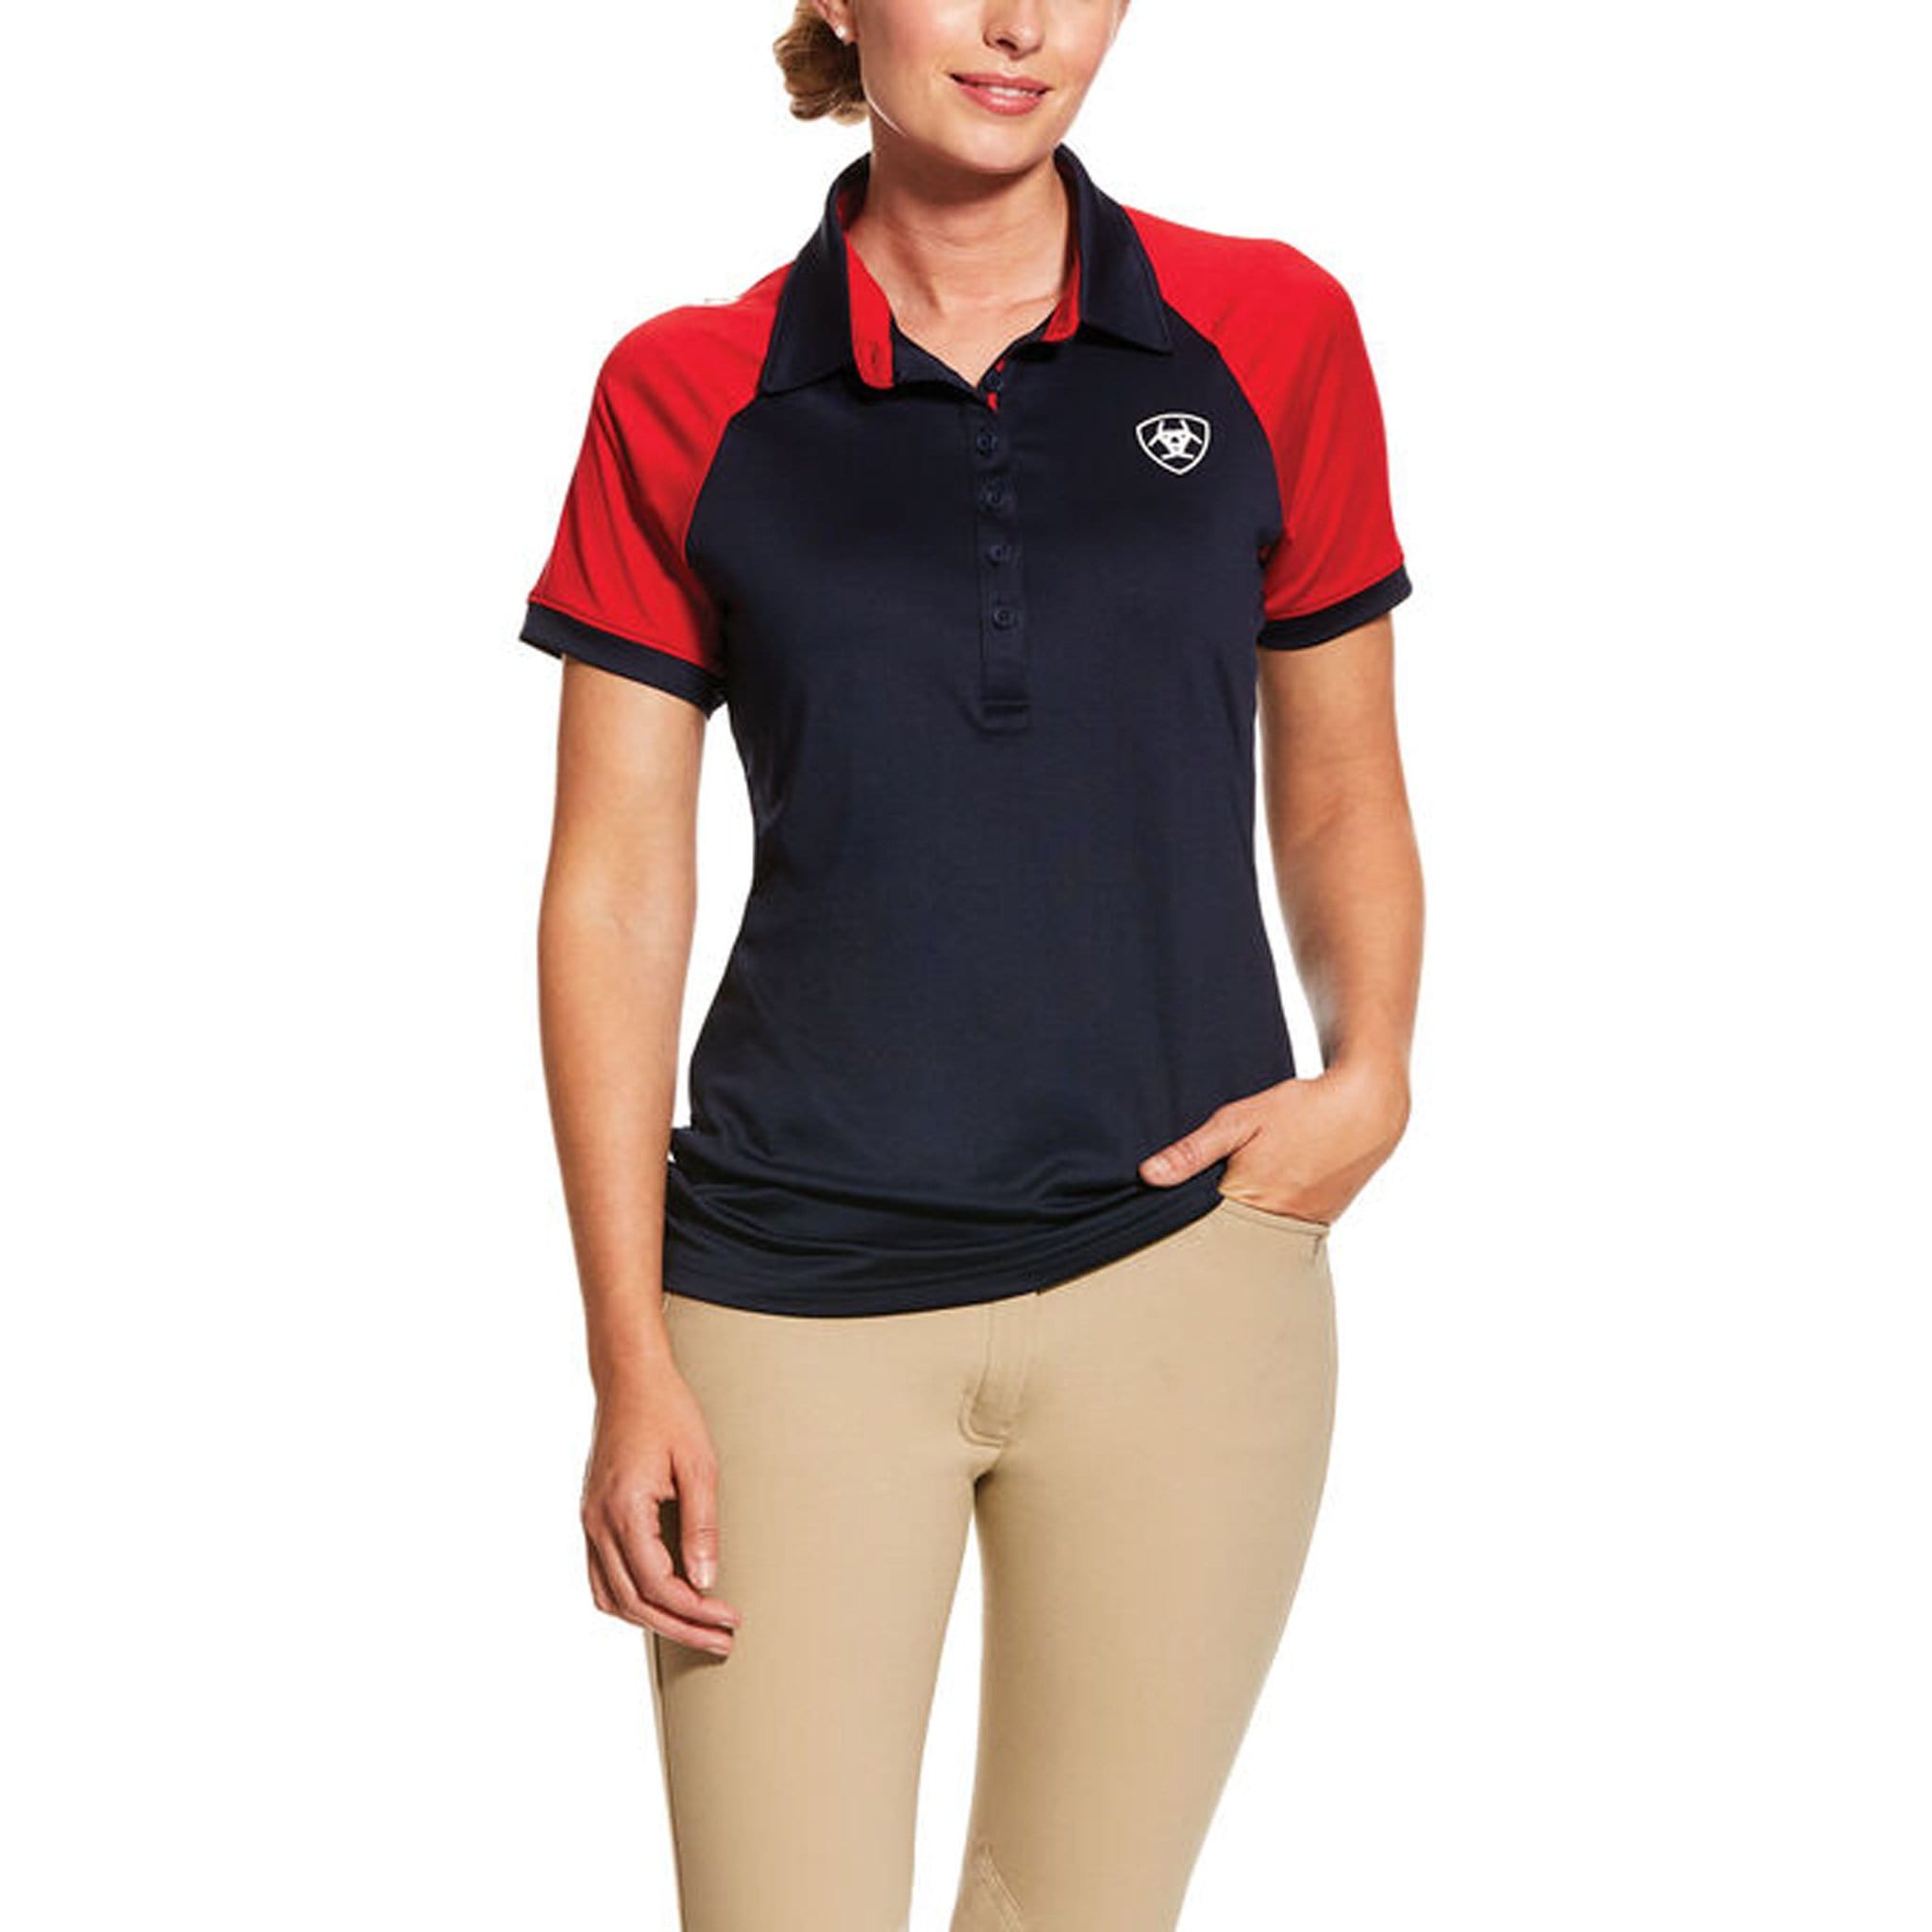 Ariat TEAM 3.0 Polo Red and Navy Front 10030552